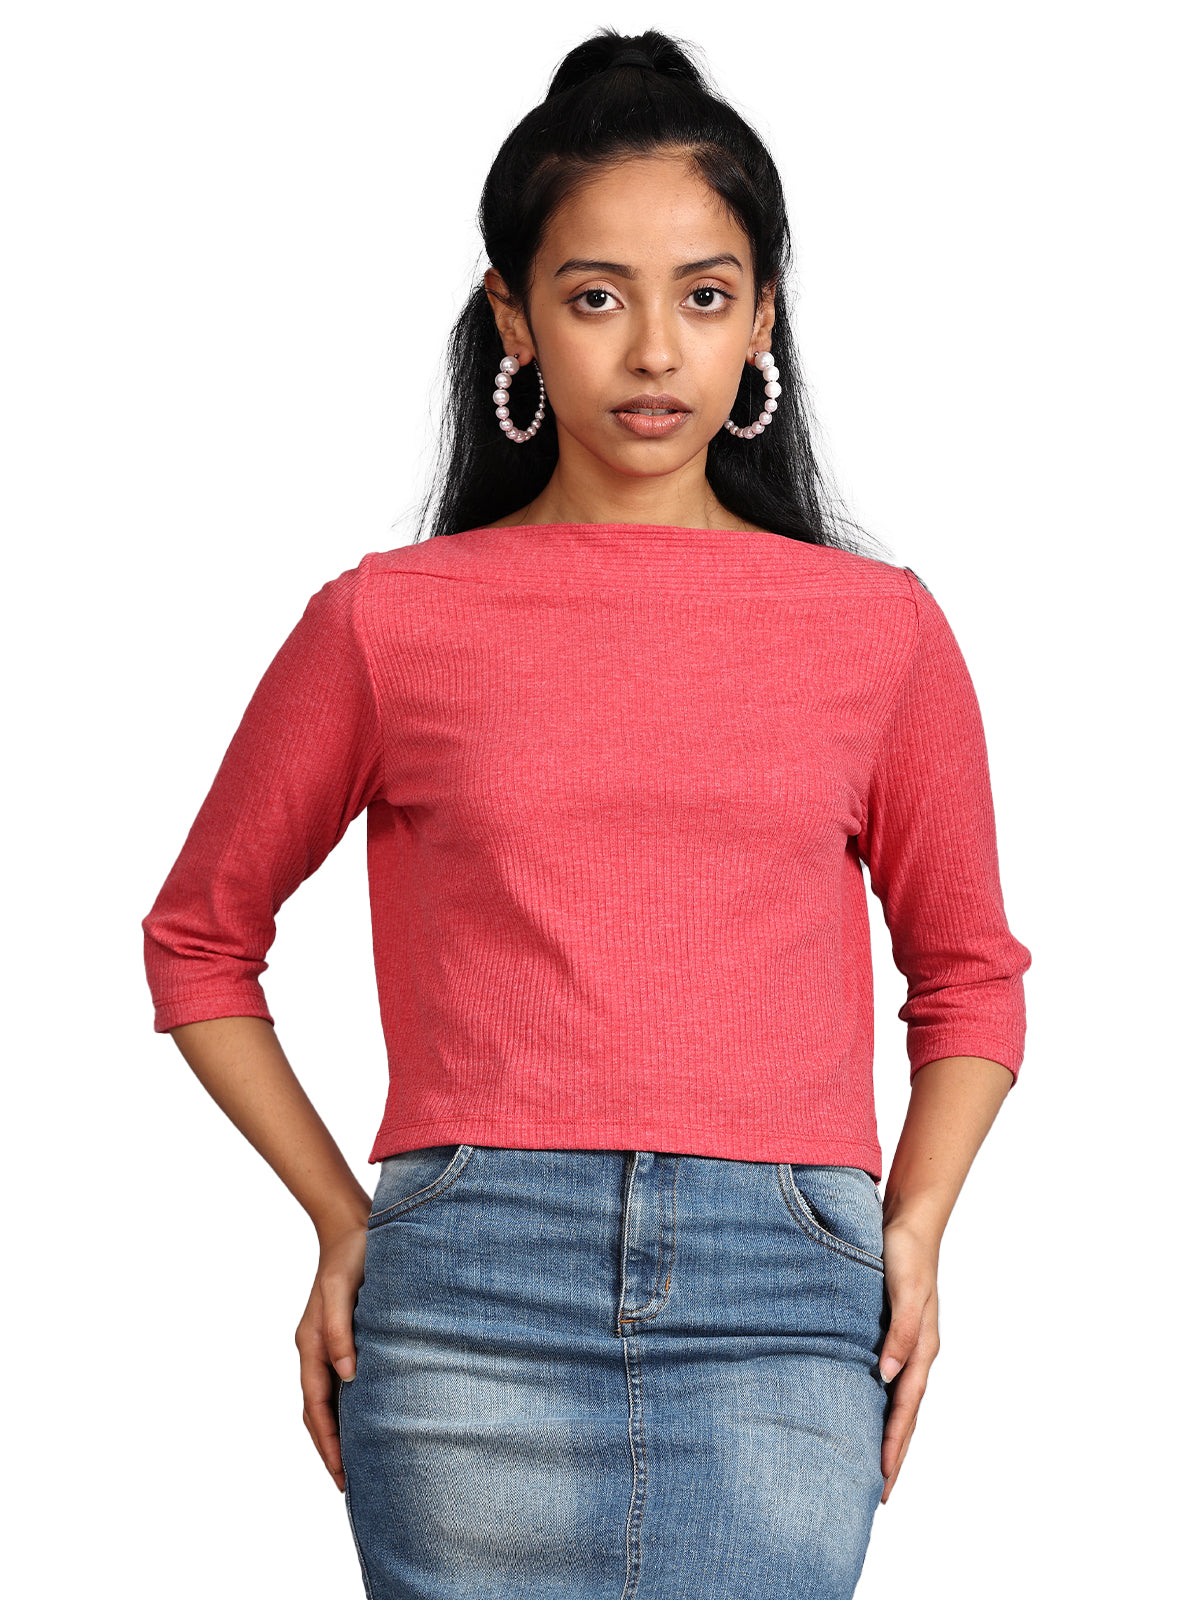 Get Your Peach Ribbed Crop Top Online Now